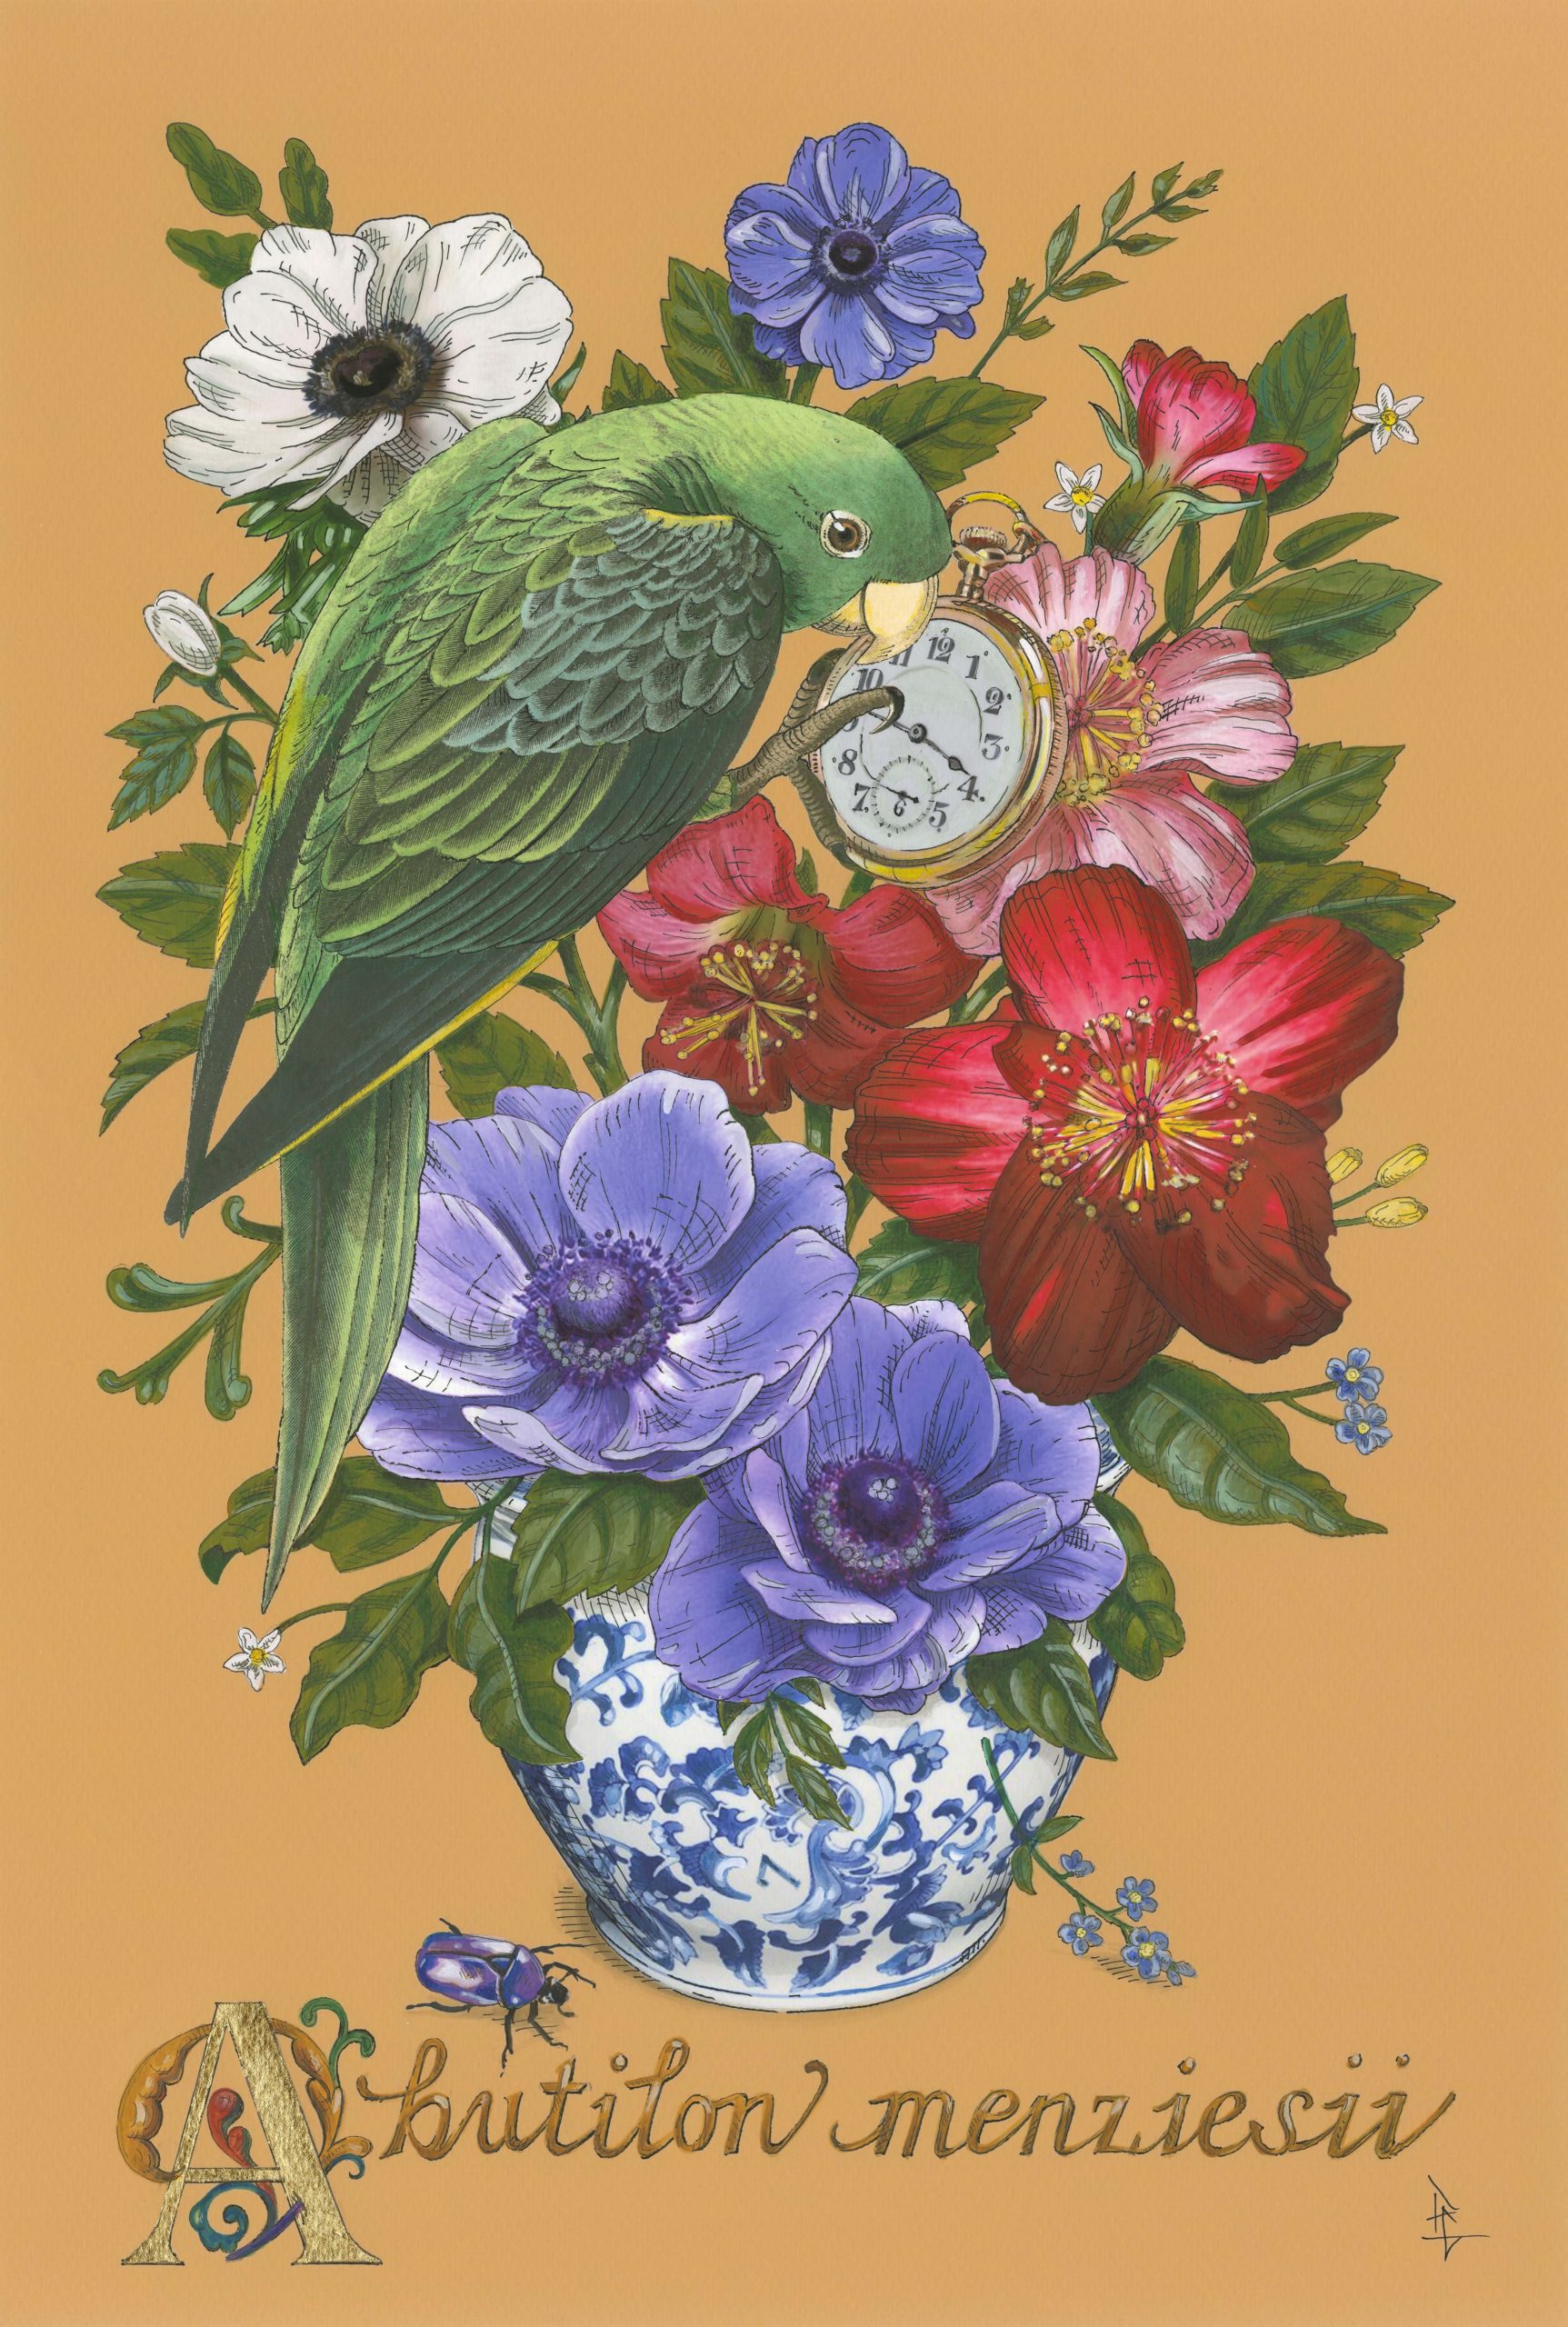 
		                					Penelope Gottlieb		                																	
																											<i>Abutilon menziesii,</i>  
																																								2021, 
																																								acrylic and ink over a digital reproduction of an Audubon print, 
																																								18 x 12 inches 
																								
		                				